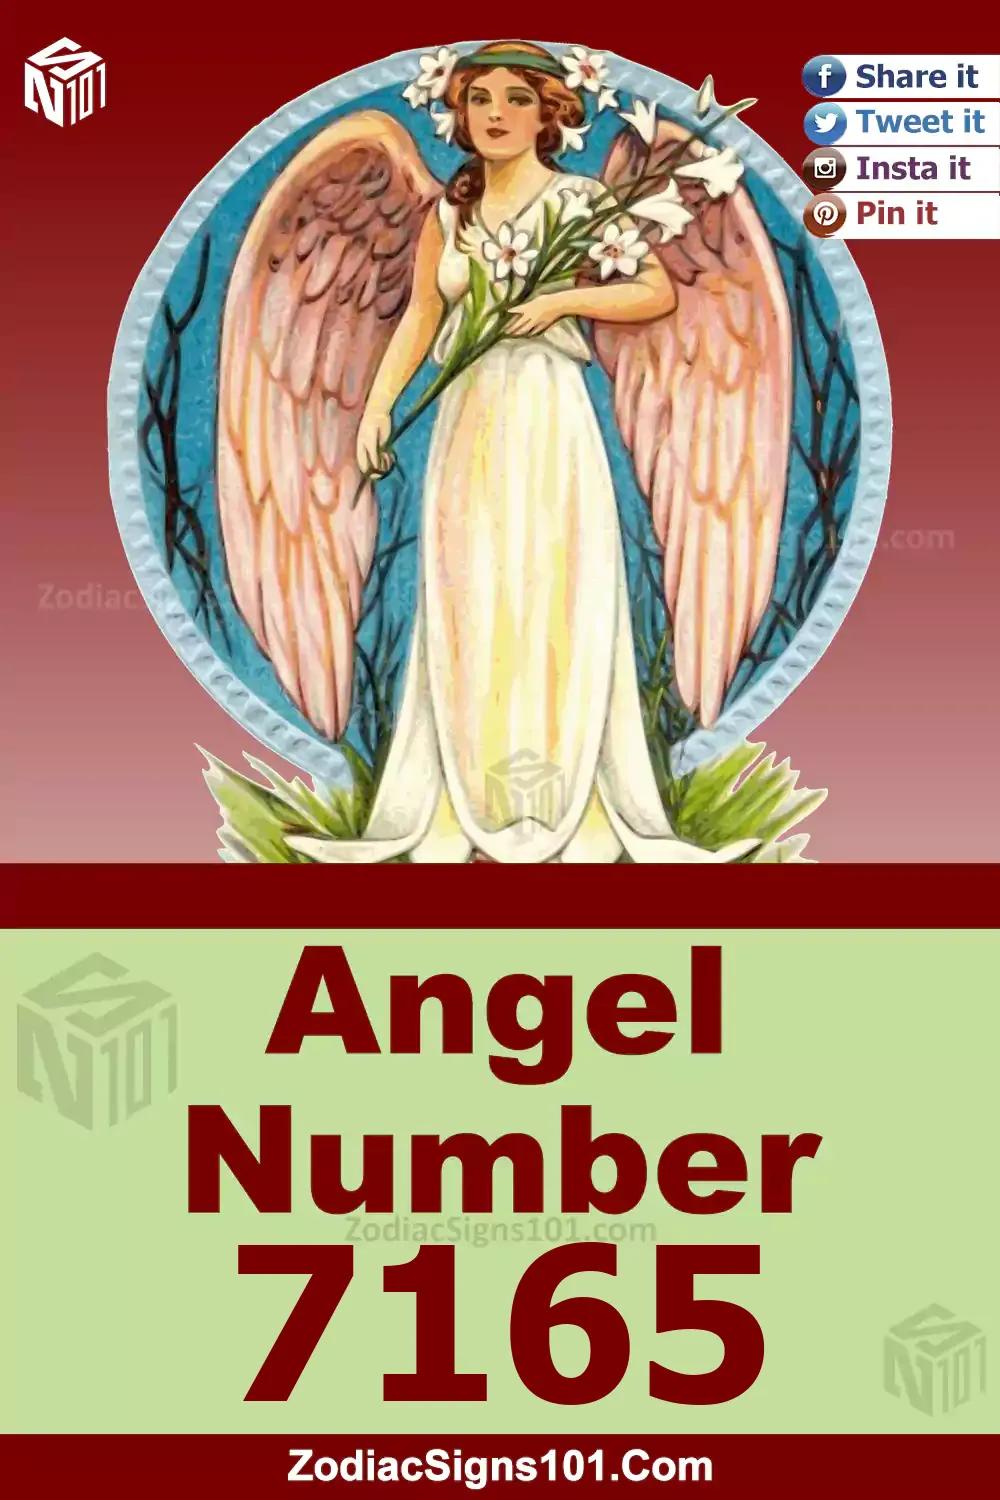 7165 Angel Number Meaning